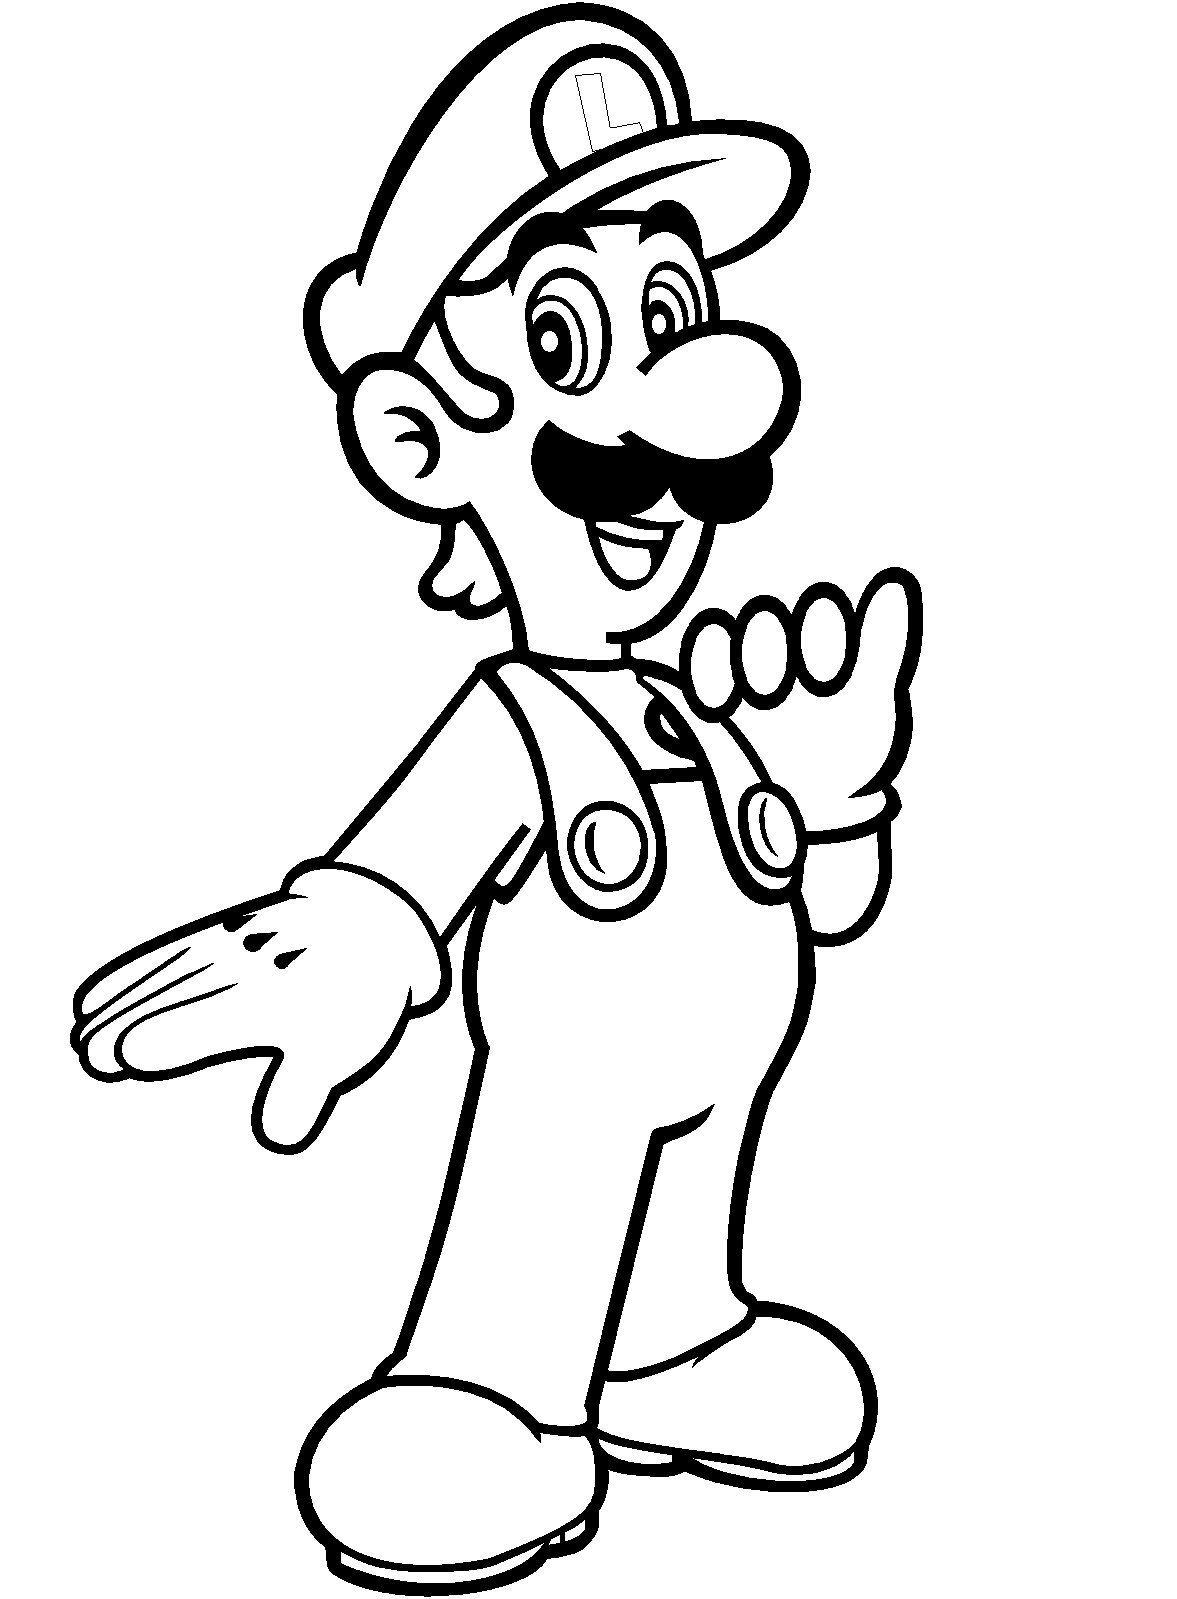 Super Mario Bros Coloring Pages - Coloring Pages For Kids And Adults